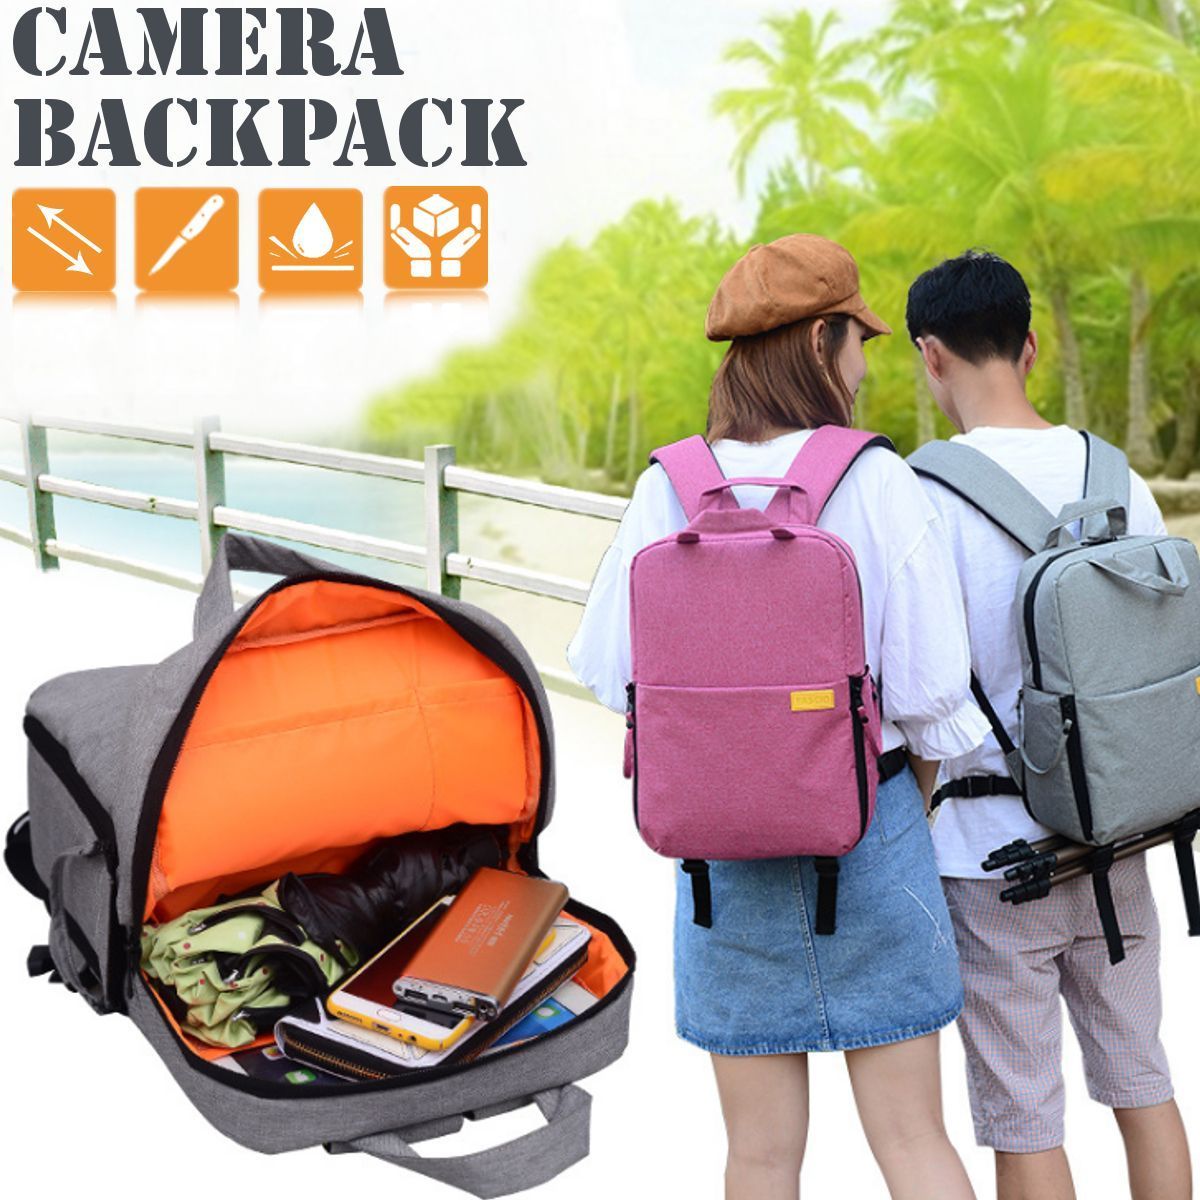 YACIO-Water-Resistant-Backpack-for-DSLR-Camera-Lens-Accessories-with-Insert-Bag-Rain-Cover-1420250